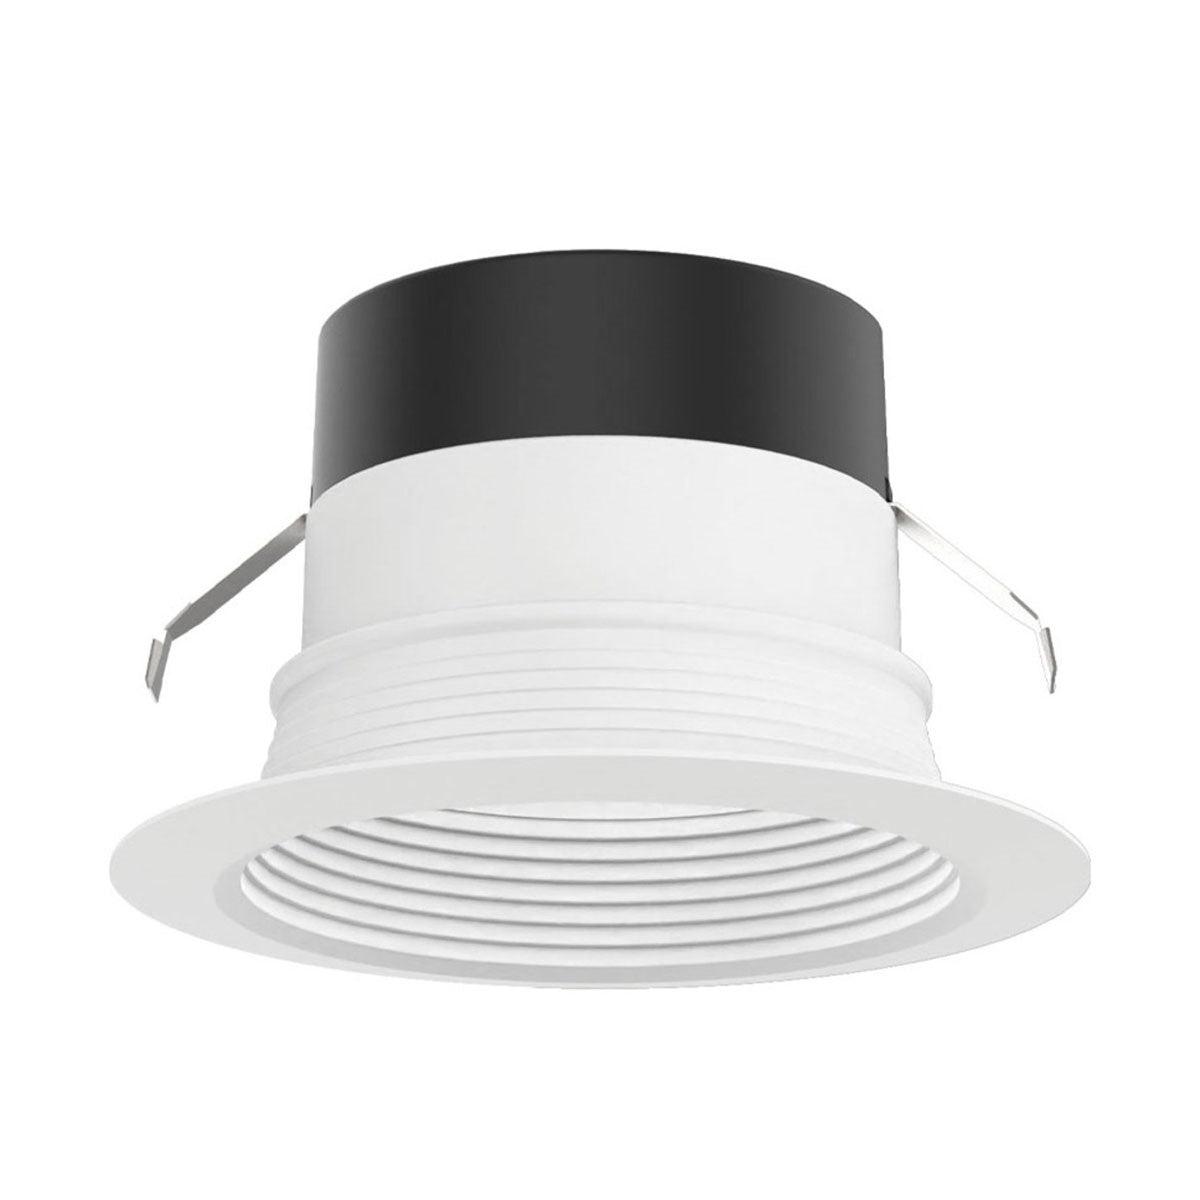 4 Inch Recessed LED Can Light, Round, 8 Watt, 700 Lumens, Selectable CCT, 2700K to 5000K, Baffle Trim - Bees Lighting